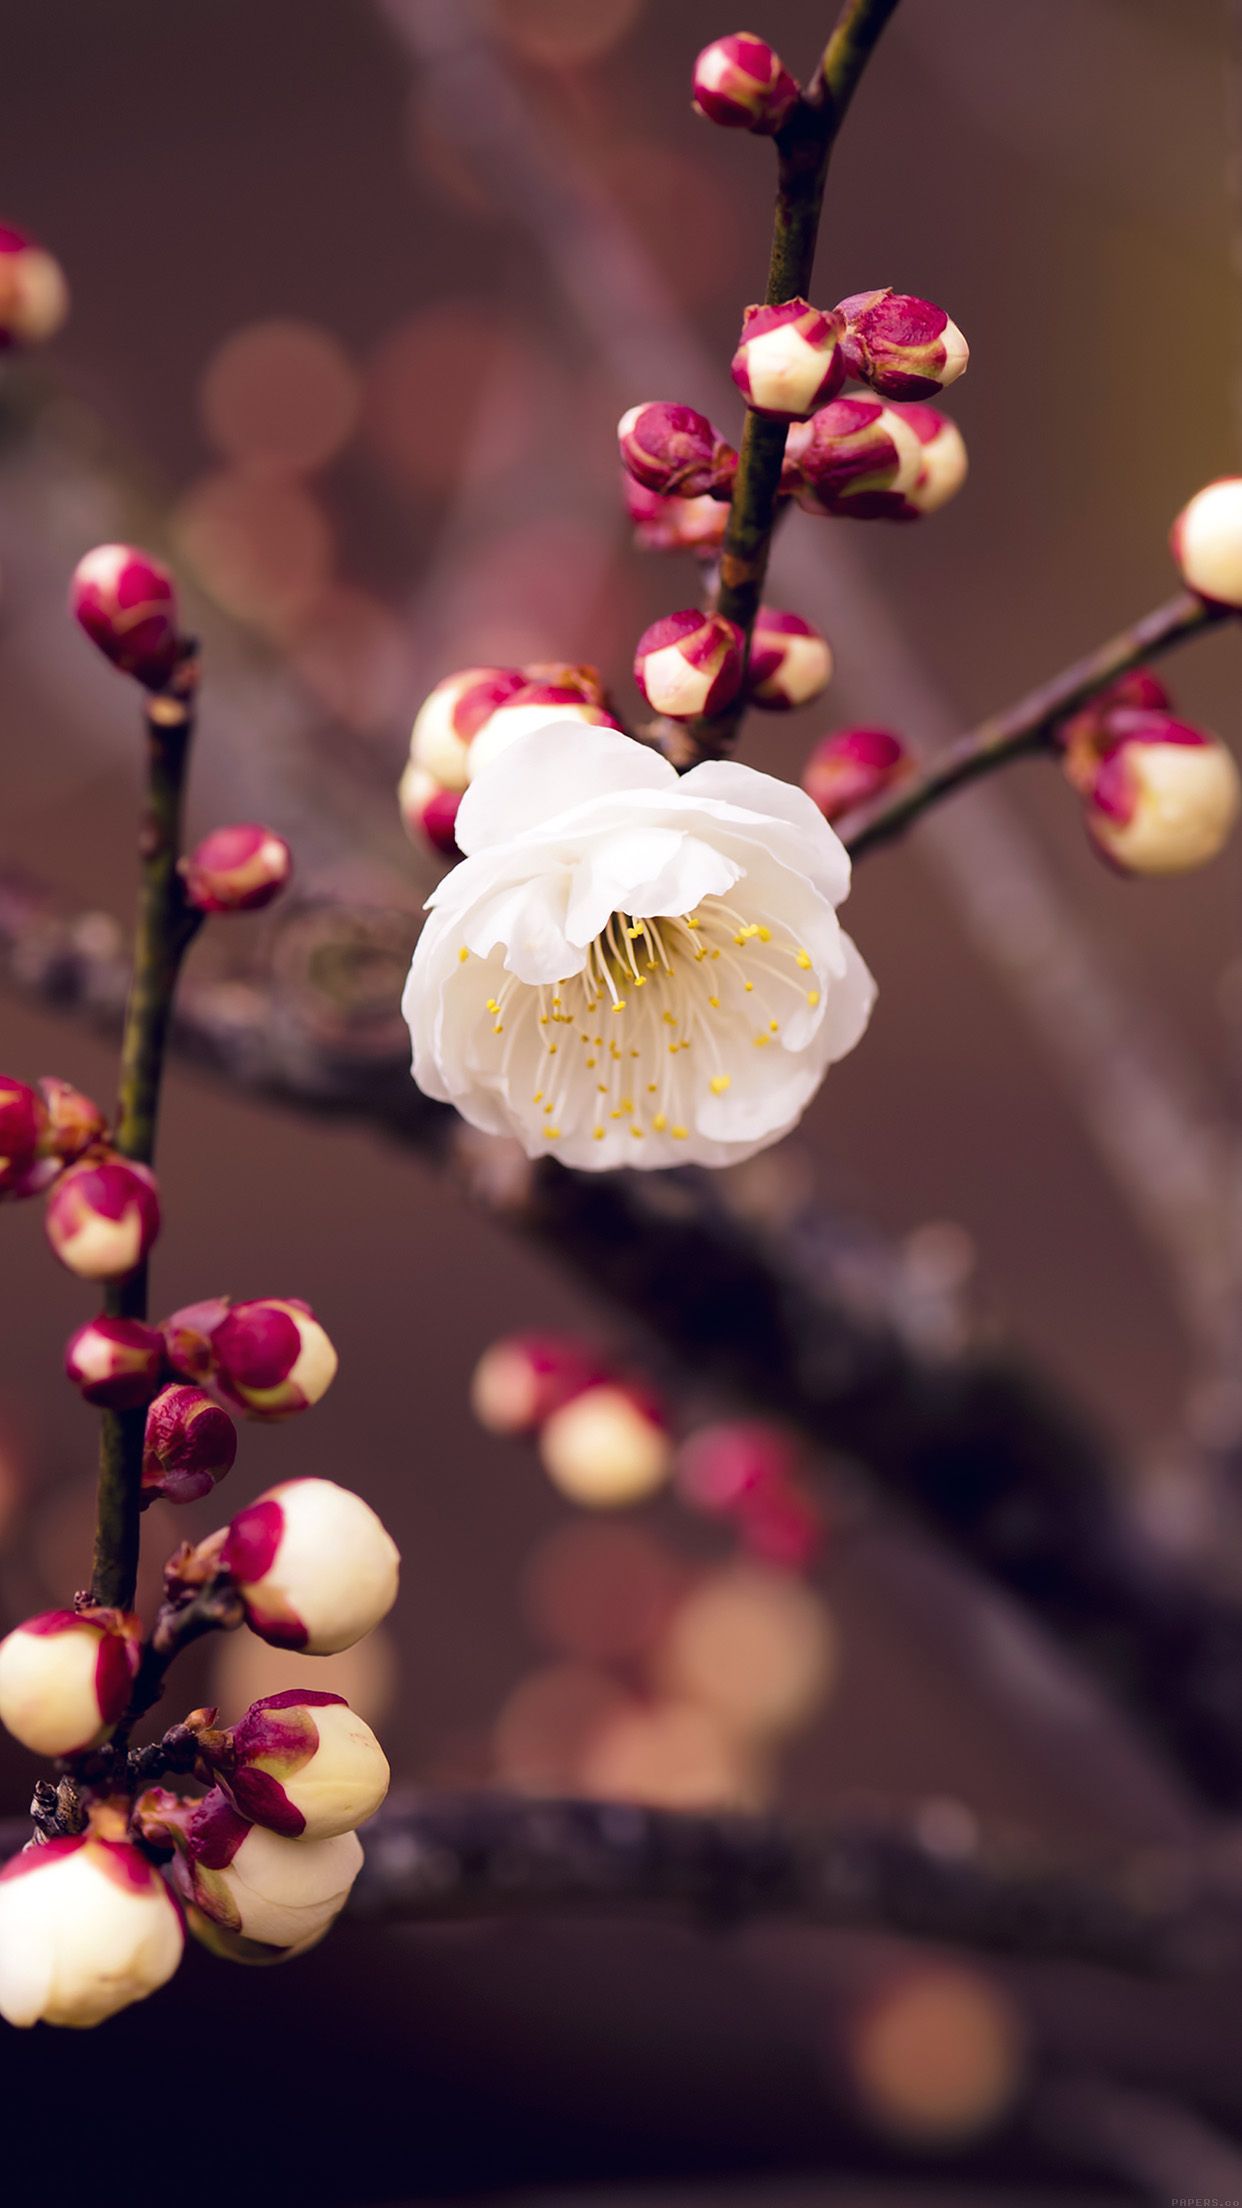 Apricot Flower Bud Spring Nature Twigs Tree Android wallpaper HD wallpaper